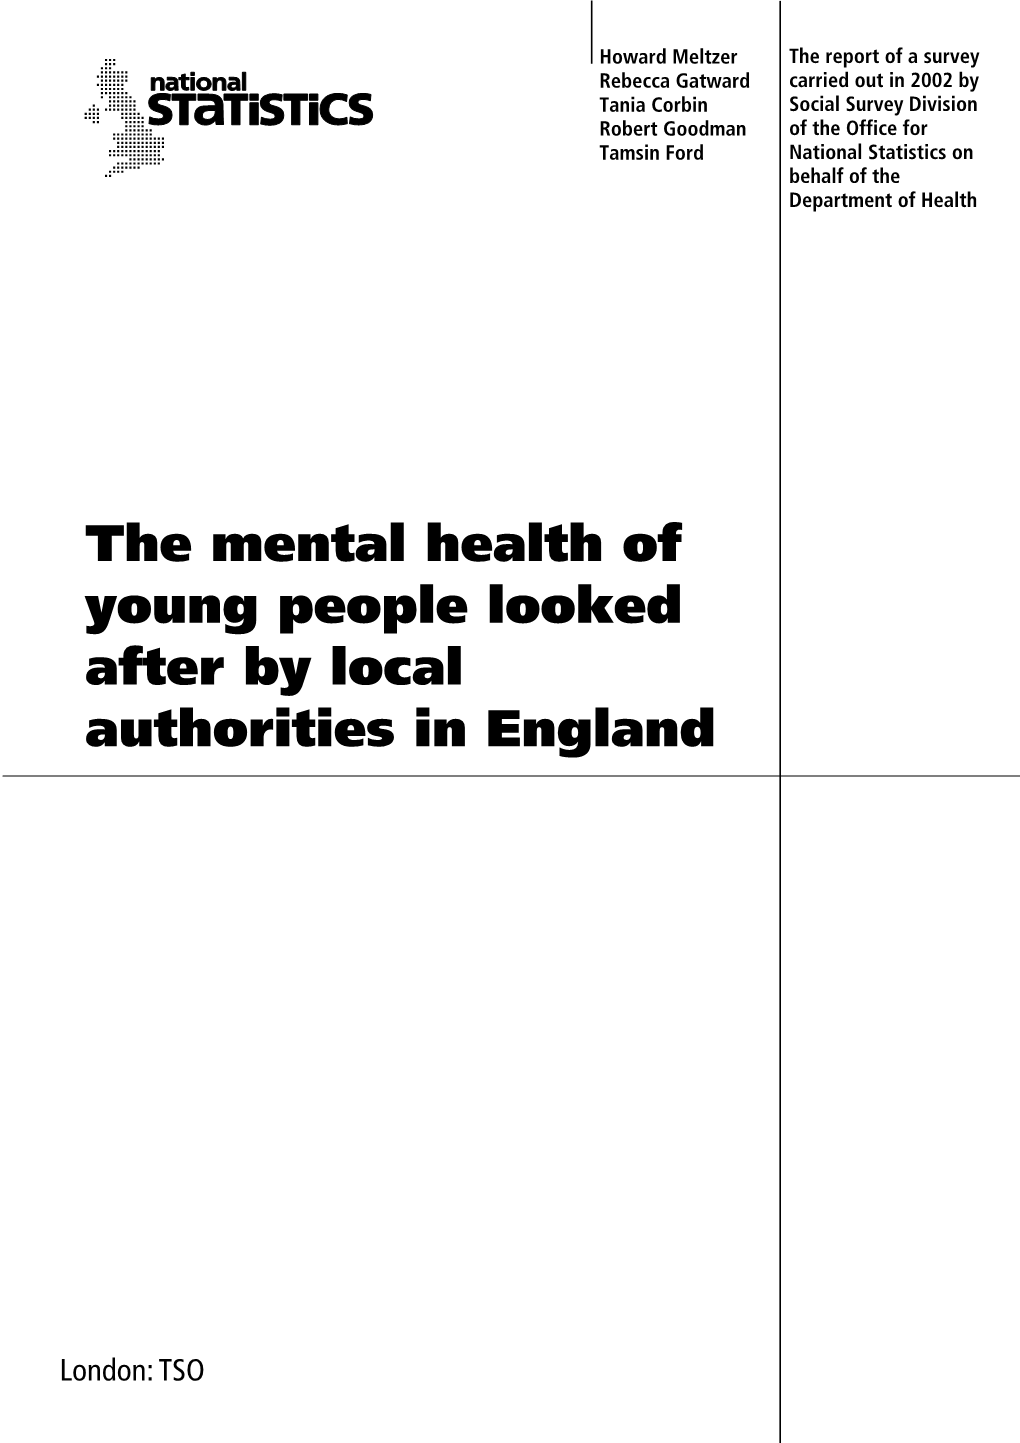 The Mental Health of Young People Looked After by Local Authorities in England